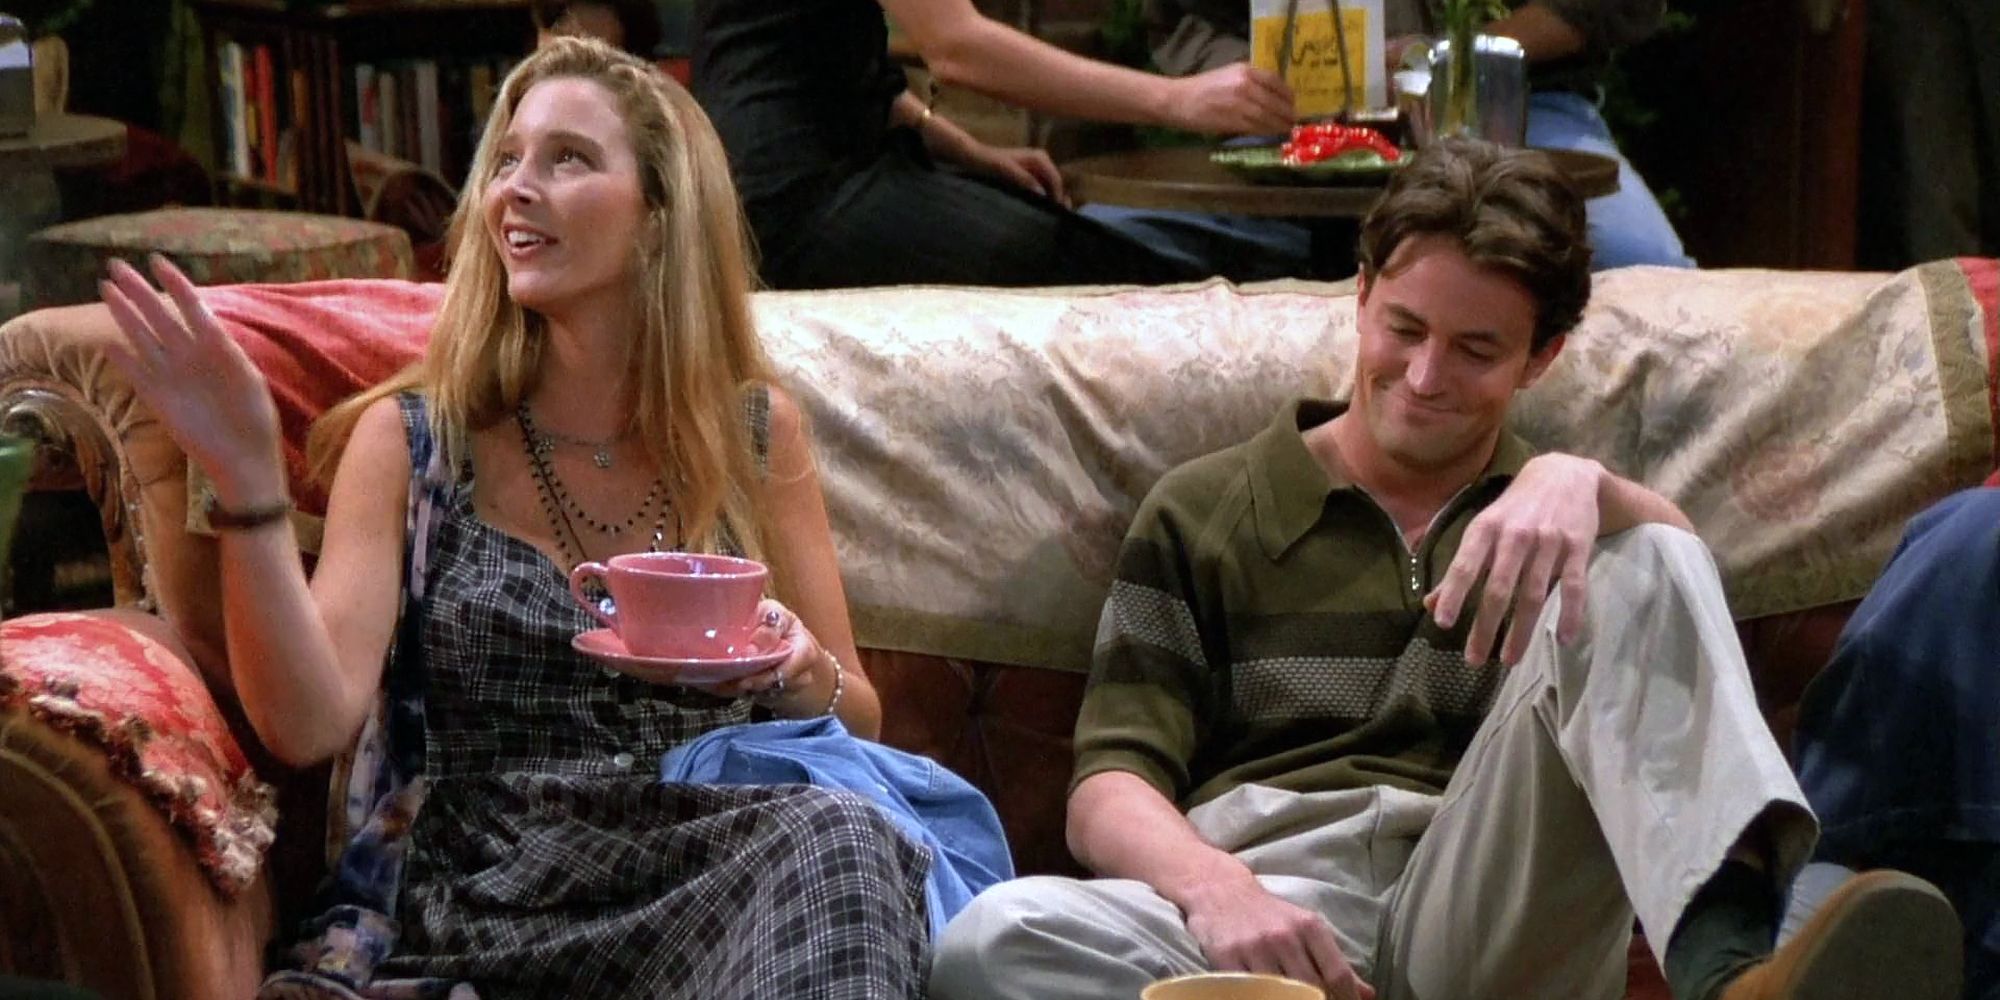 'Friends' Phoebe (Lisa Kudrow) and Chandler (Matthew Perry) were originally destined to be comic relief before being upgraded to series regulars